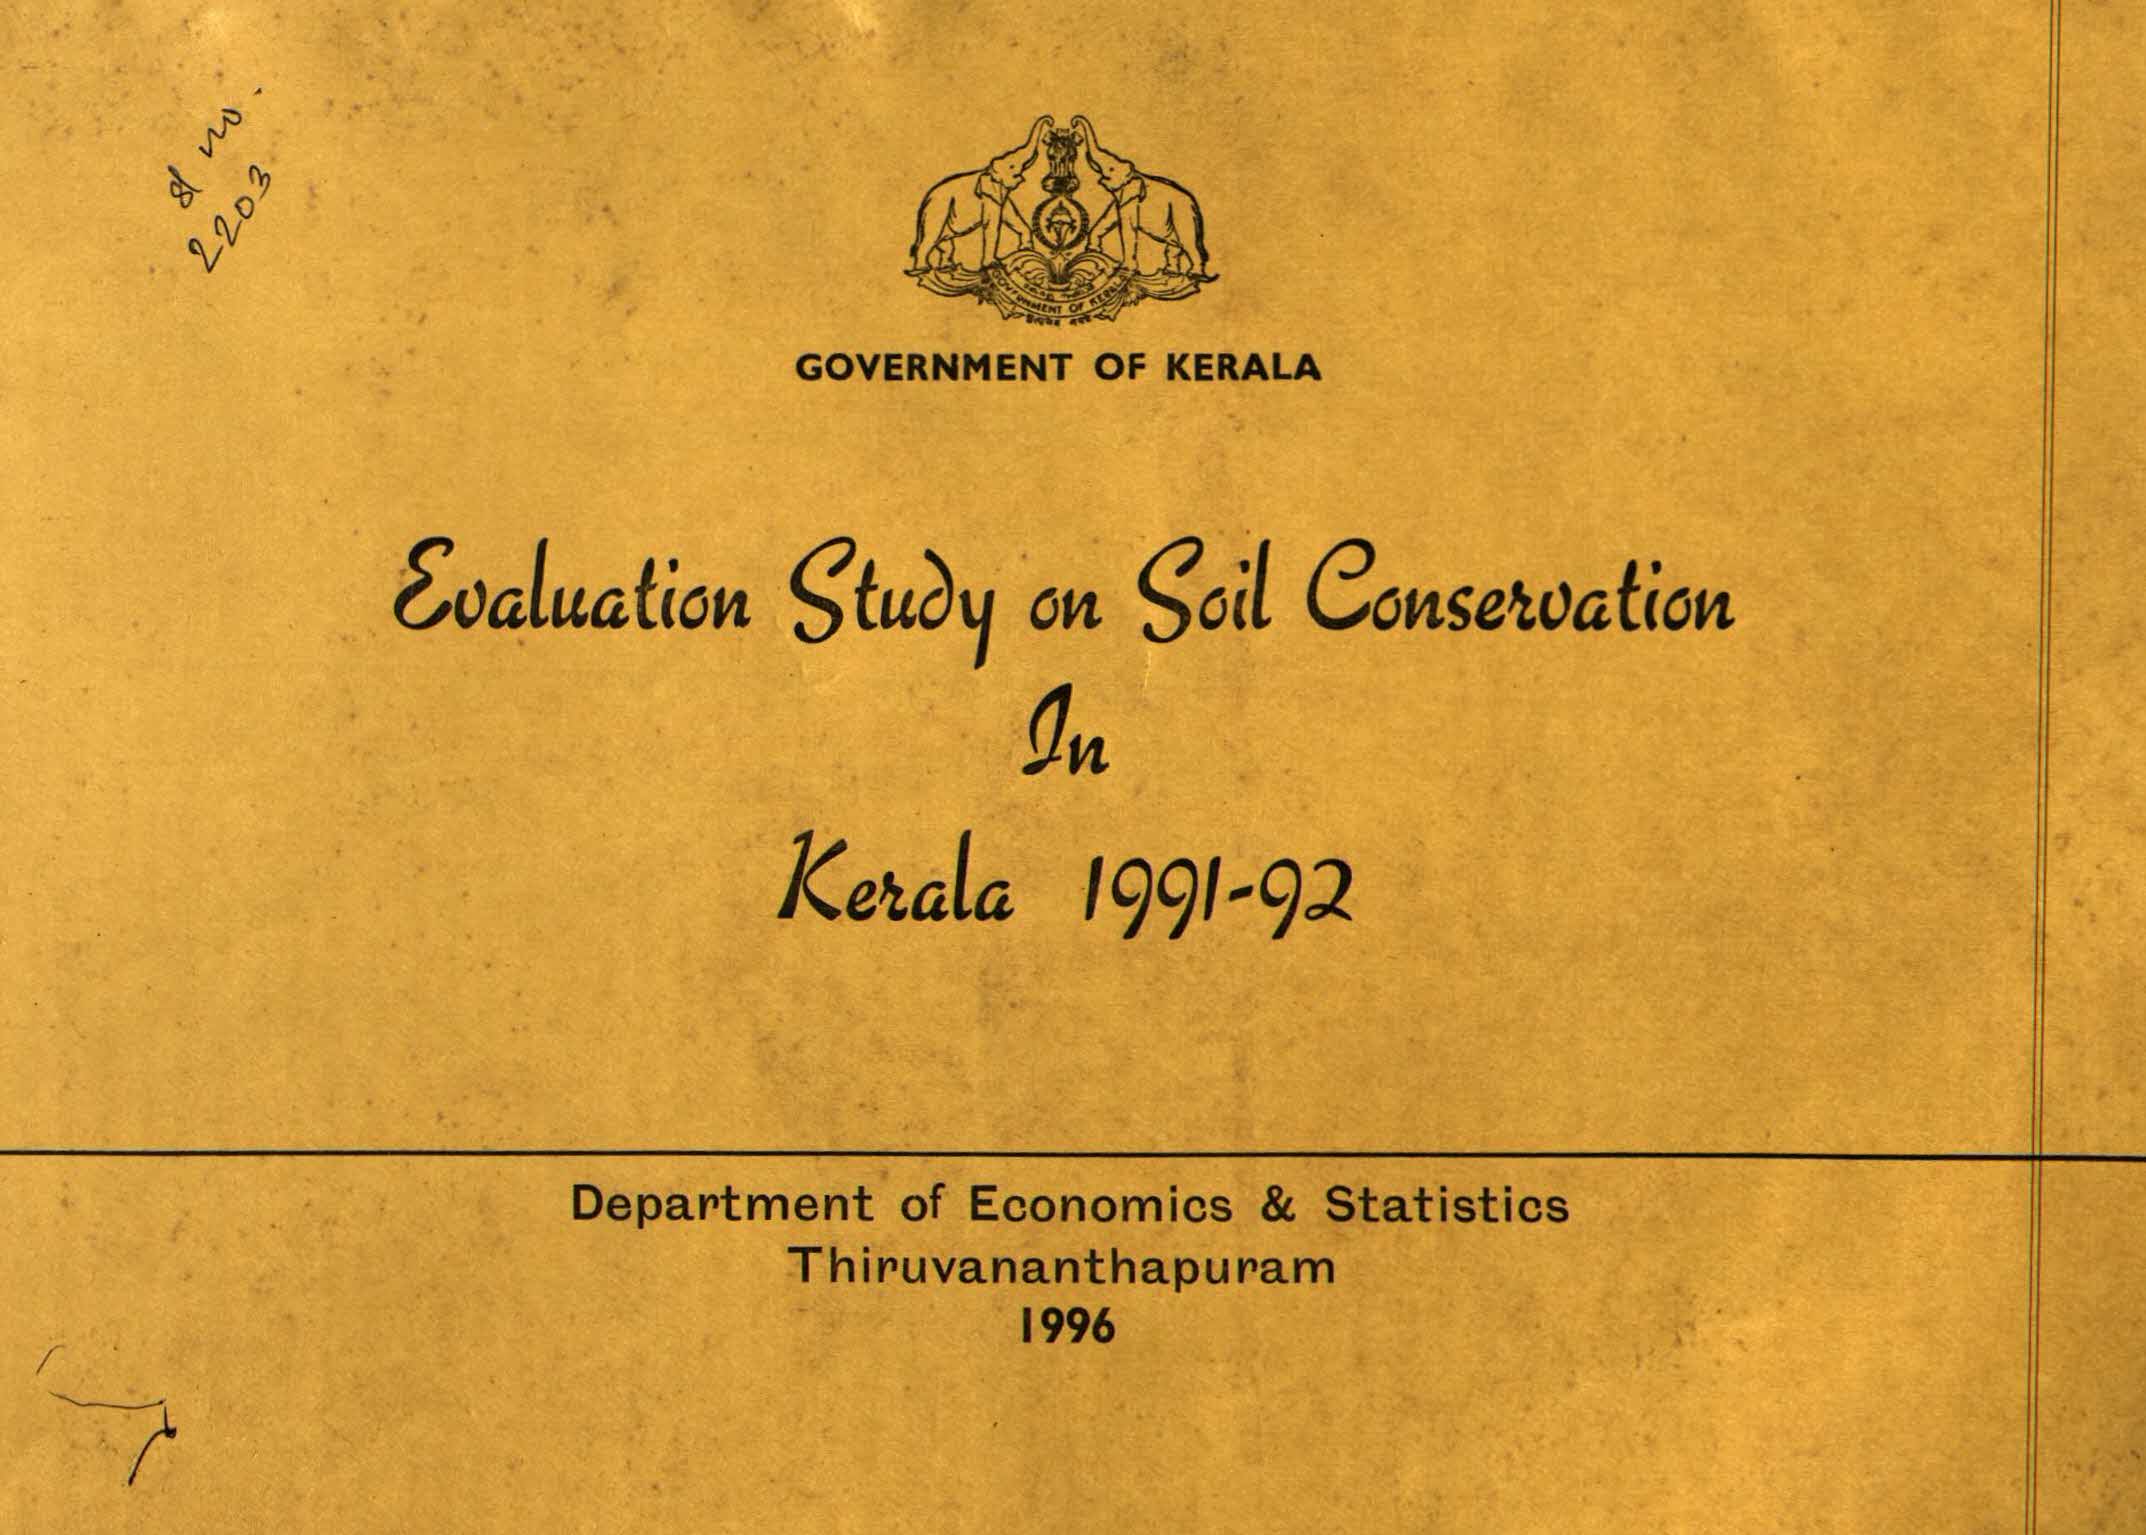 Evaluation study on Soil Conservation in Kerala 1991-92